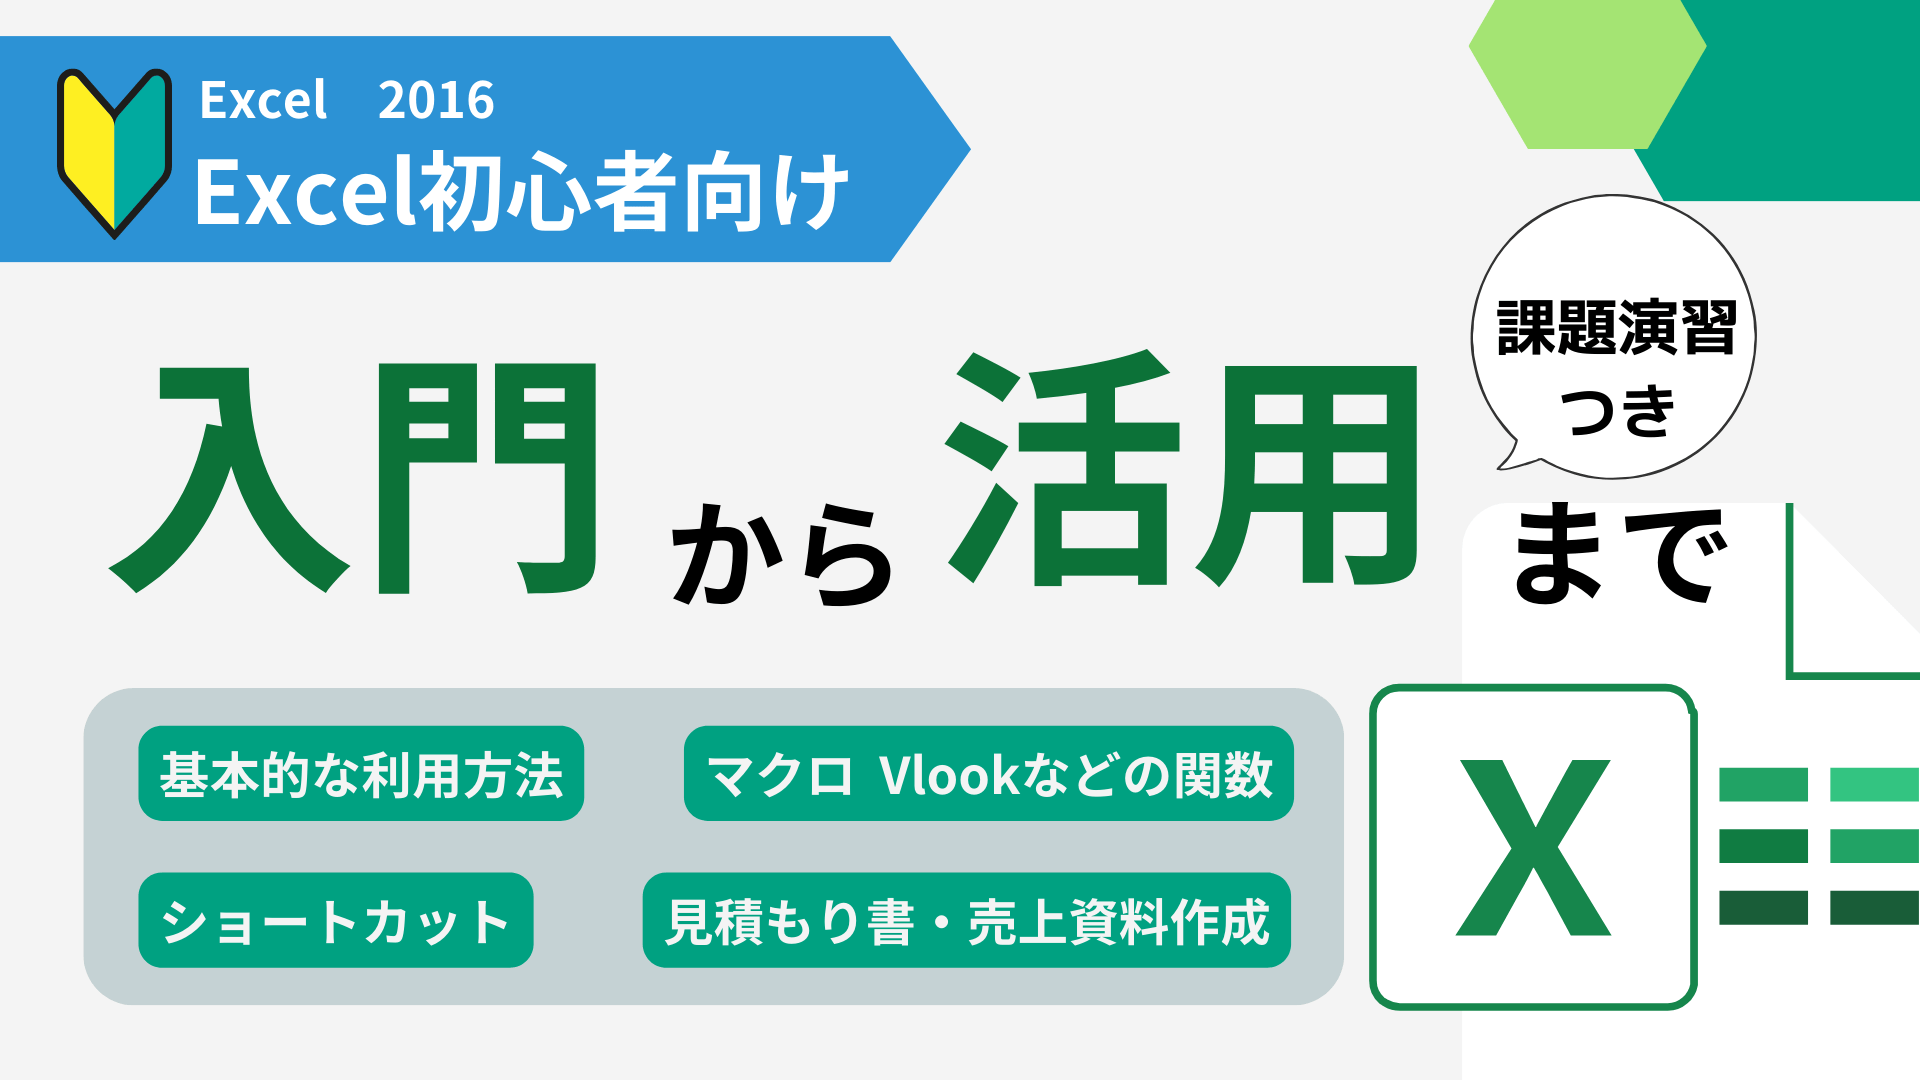 Excel 2016 Learning（入門から活用まで）課題演習つき